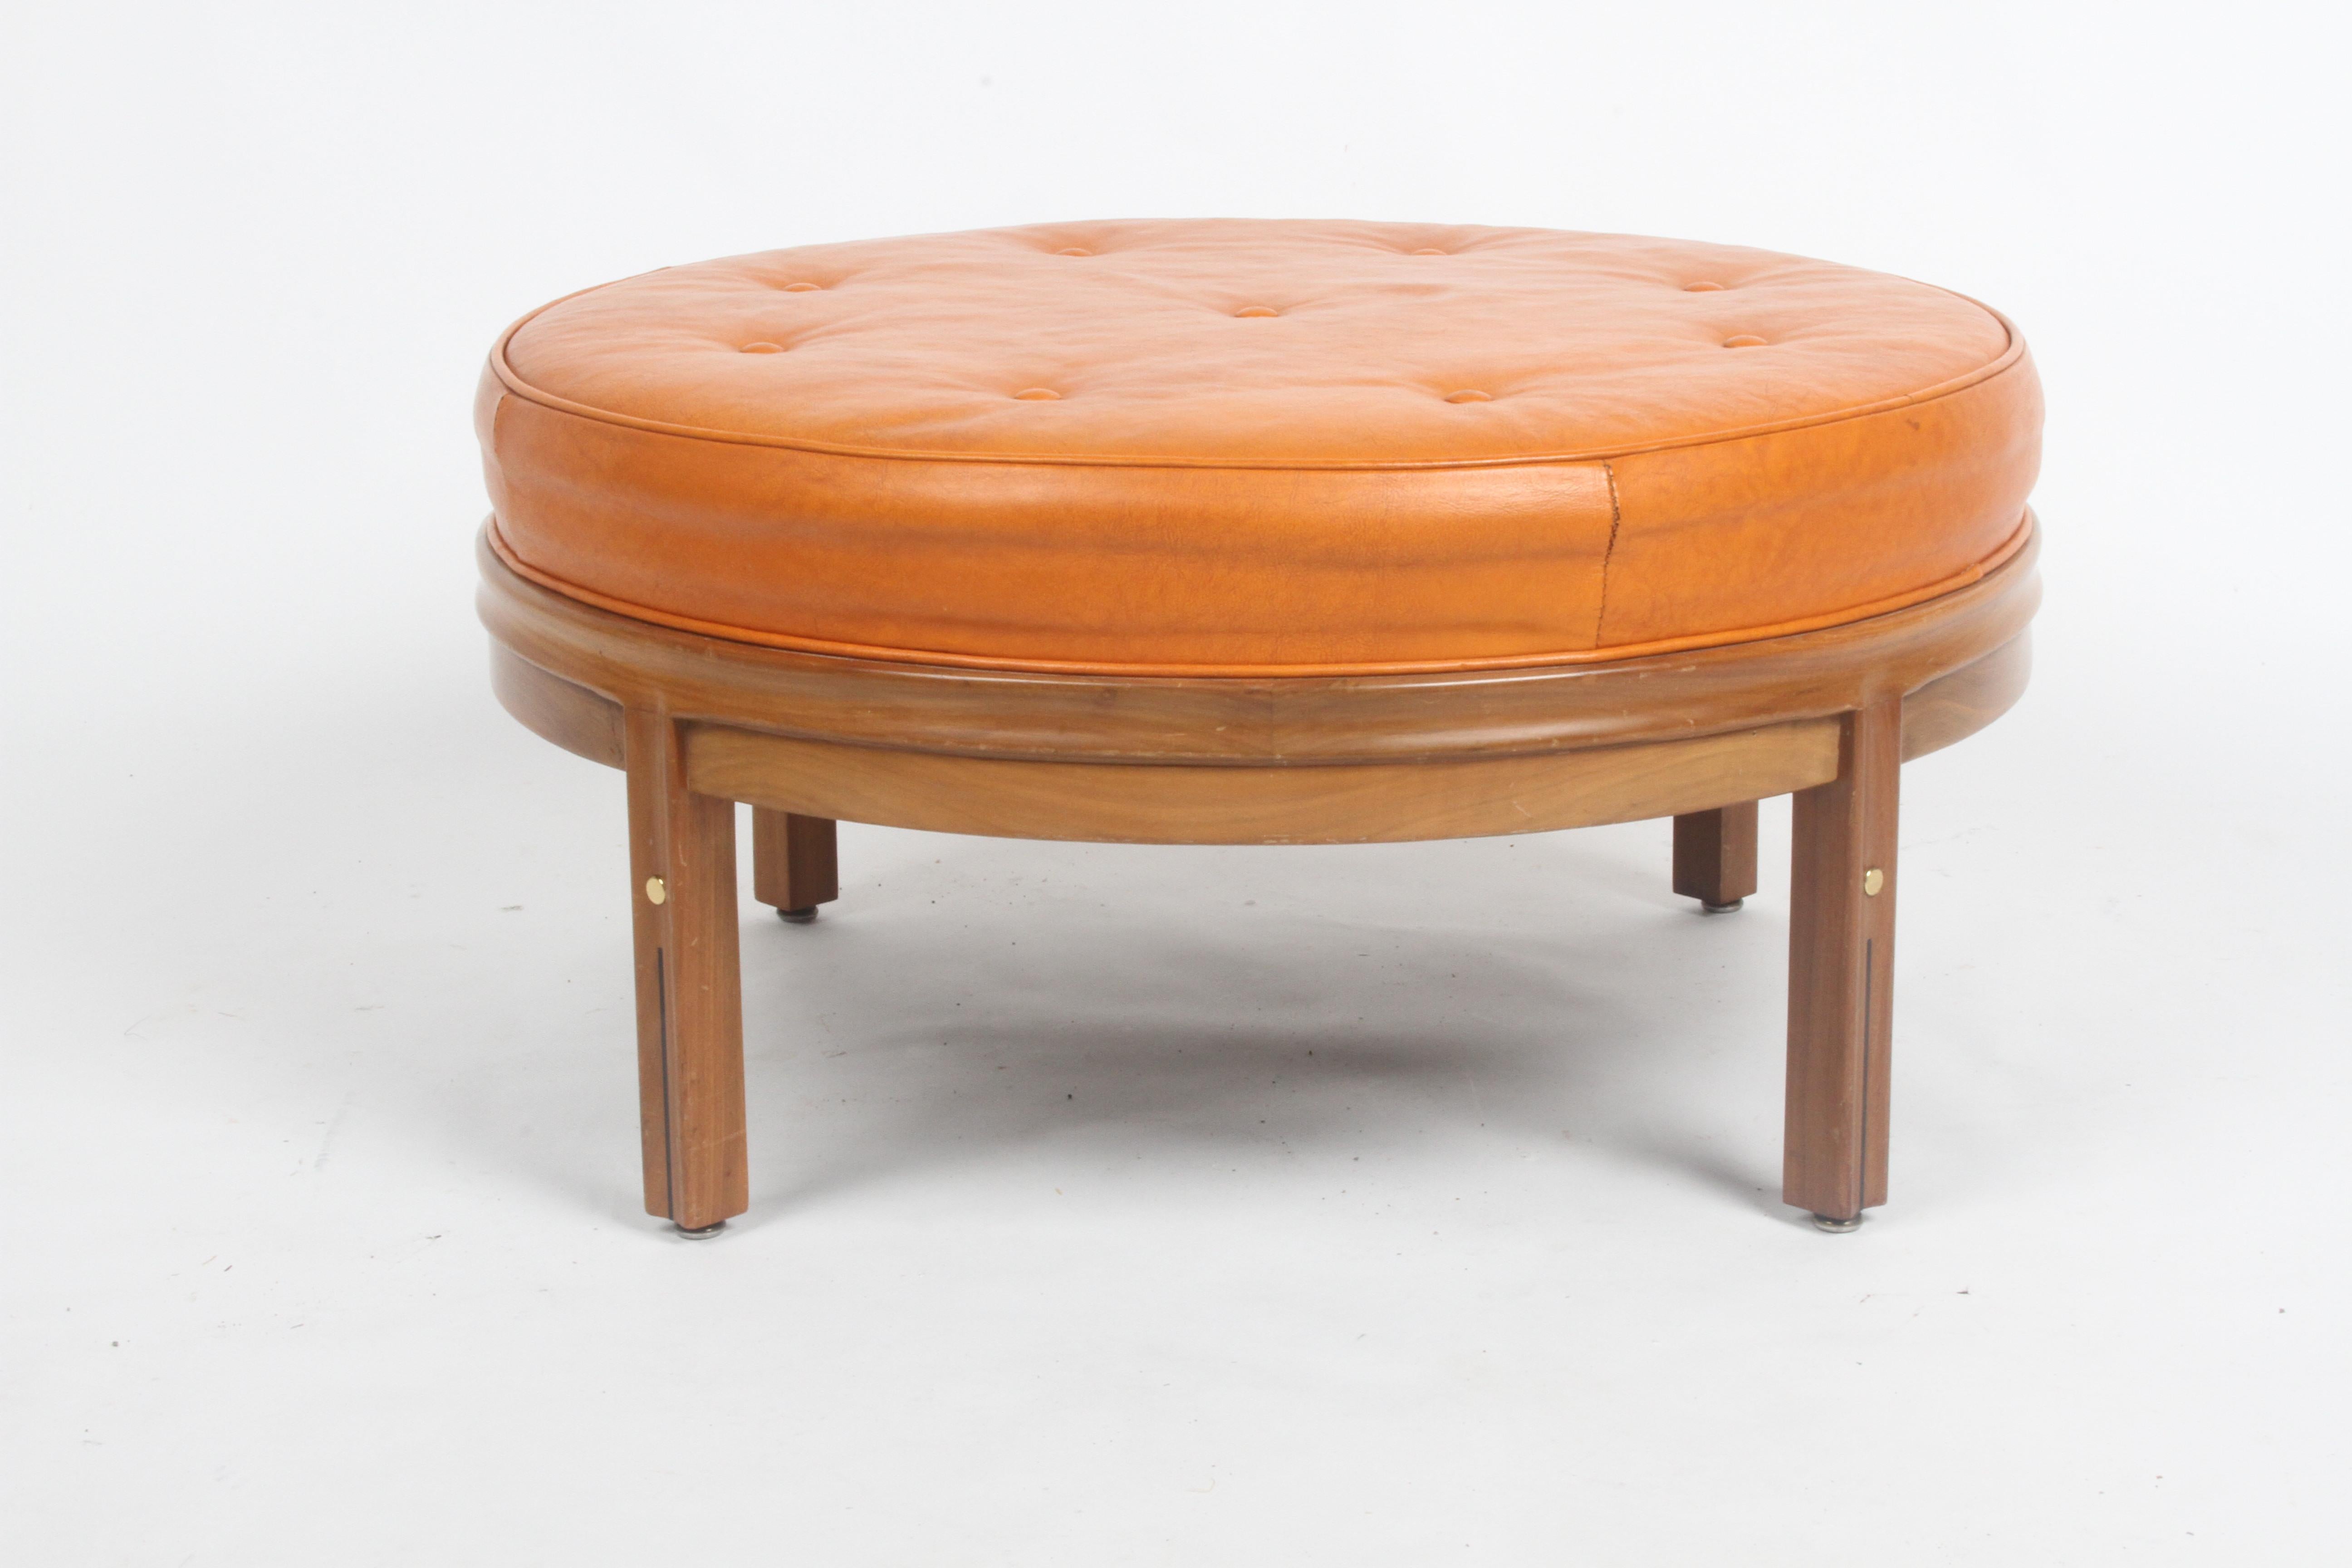 All original Mid-Century Modern round orange leather ottoman on sculpted wood base with tufted seat, designed by Gerry Zanck for Gregori furniture of Shelbyville, Indiana. Sculpted wood frame, with brass inserts and black inlay on legs. Original